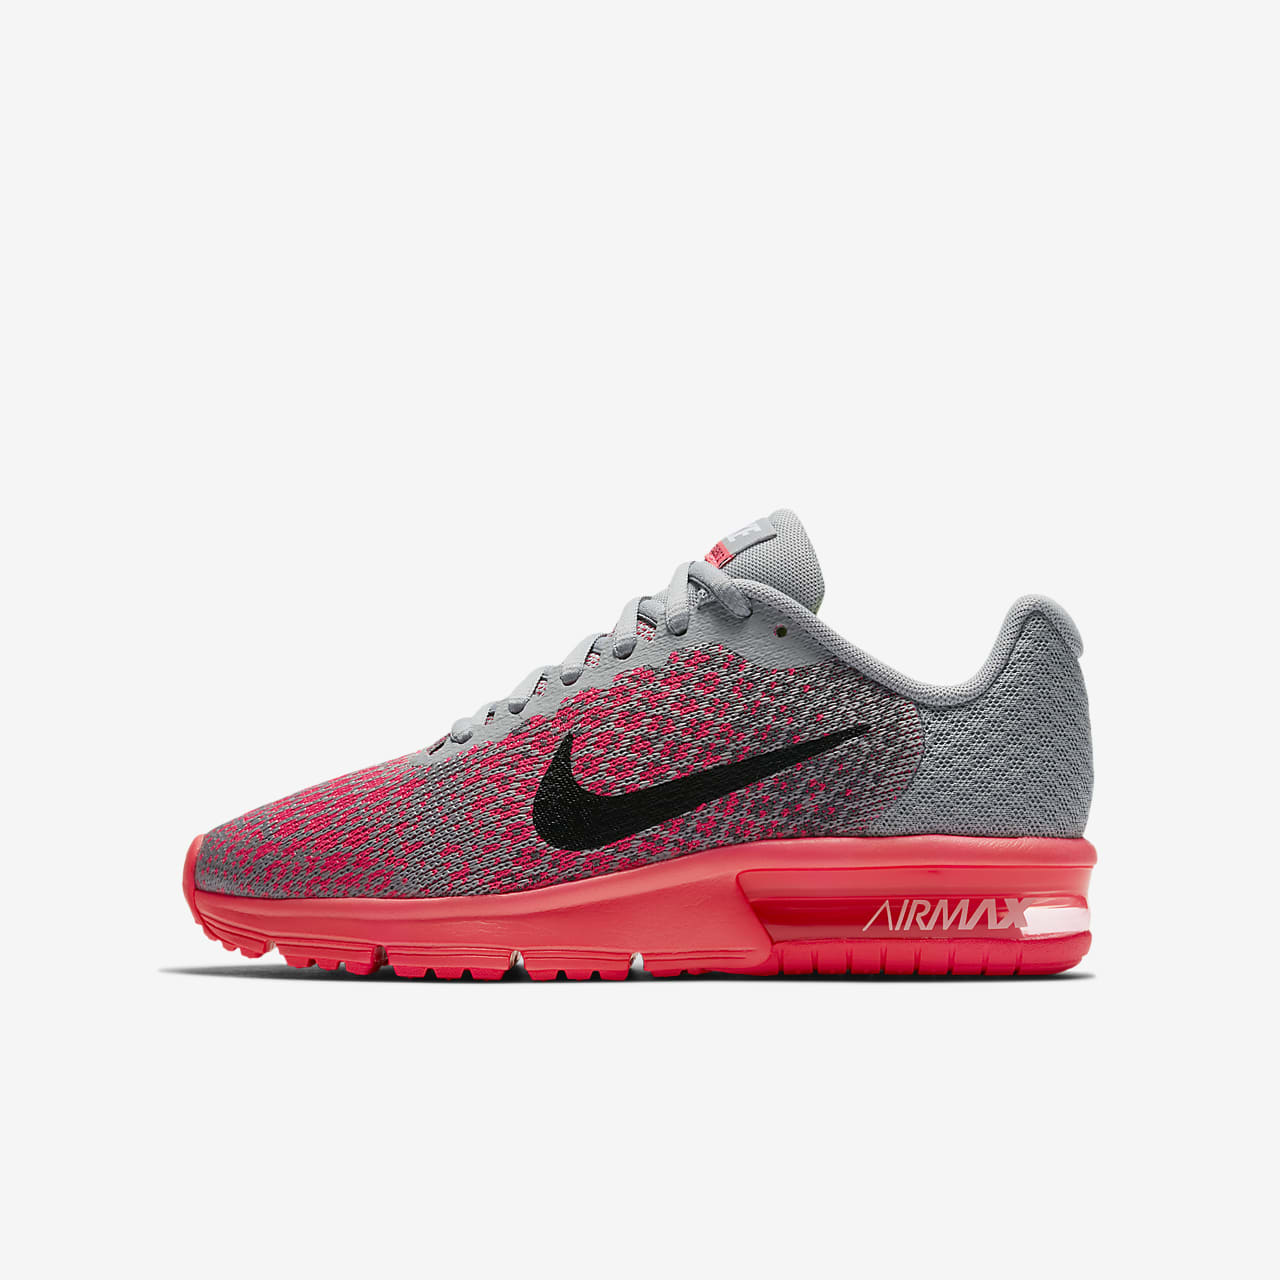 nike sequent 2 women's